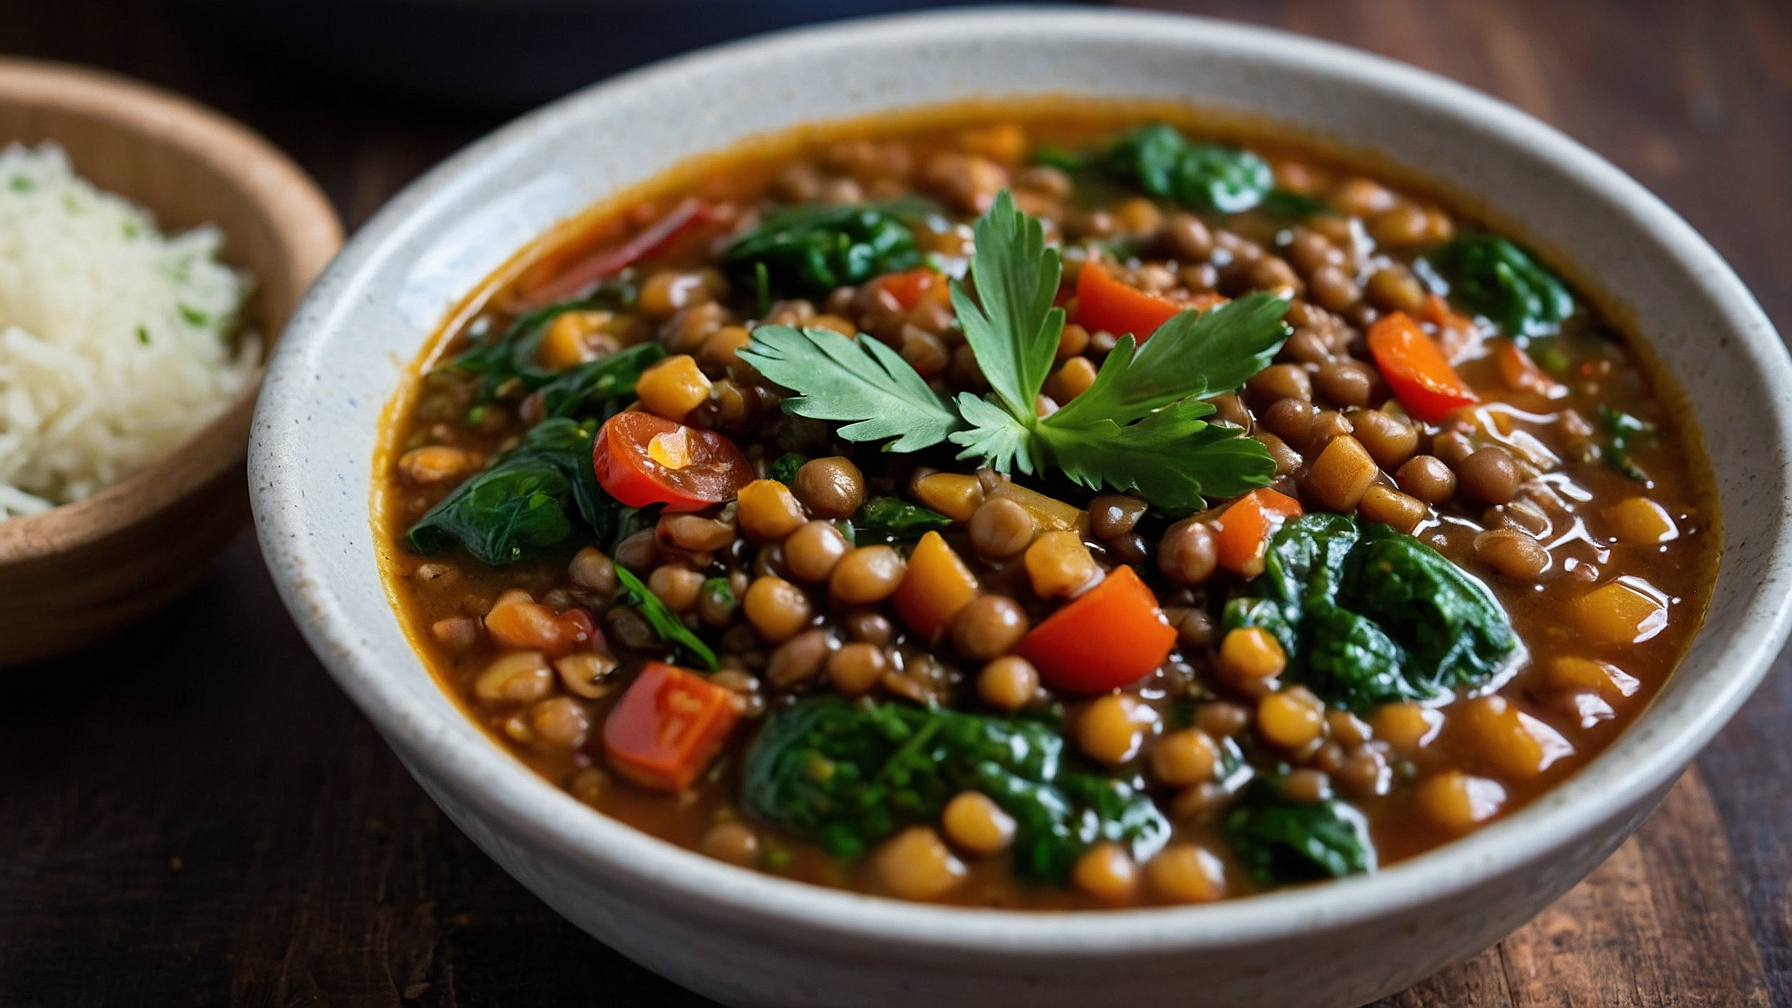 Nutrient-dense lentil and spinach superfood stew in a bowl